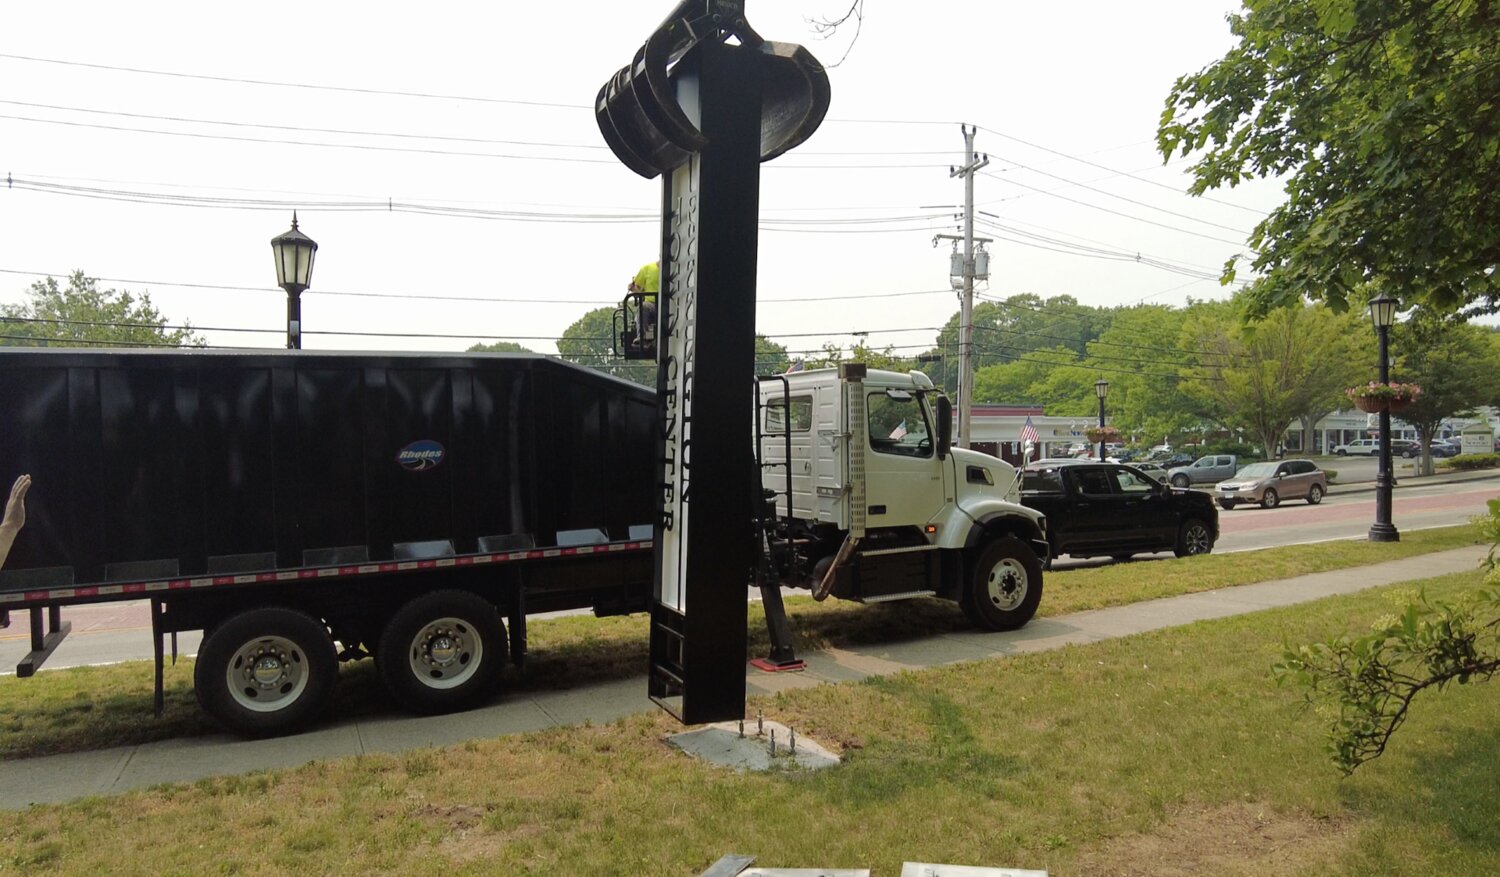 A Barrington DPW crane removes one of the “Barrington Town Center” signs on Tuesday, June 6.